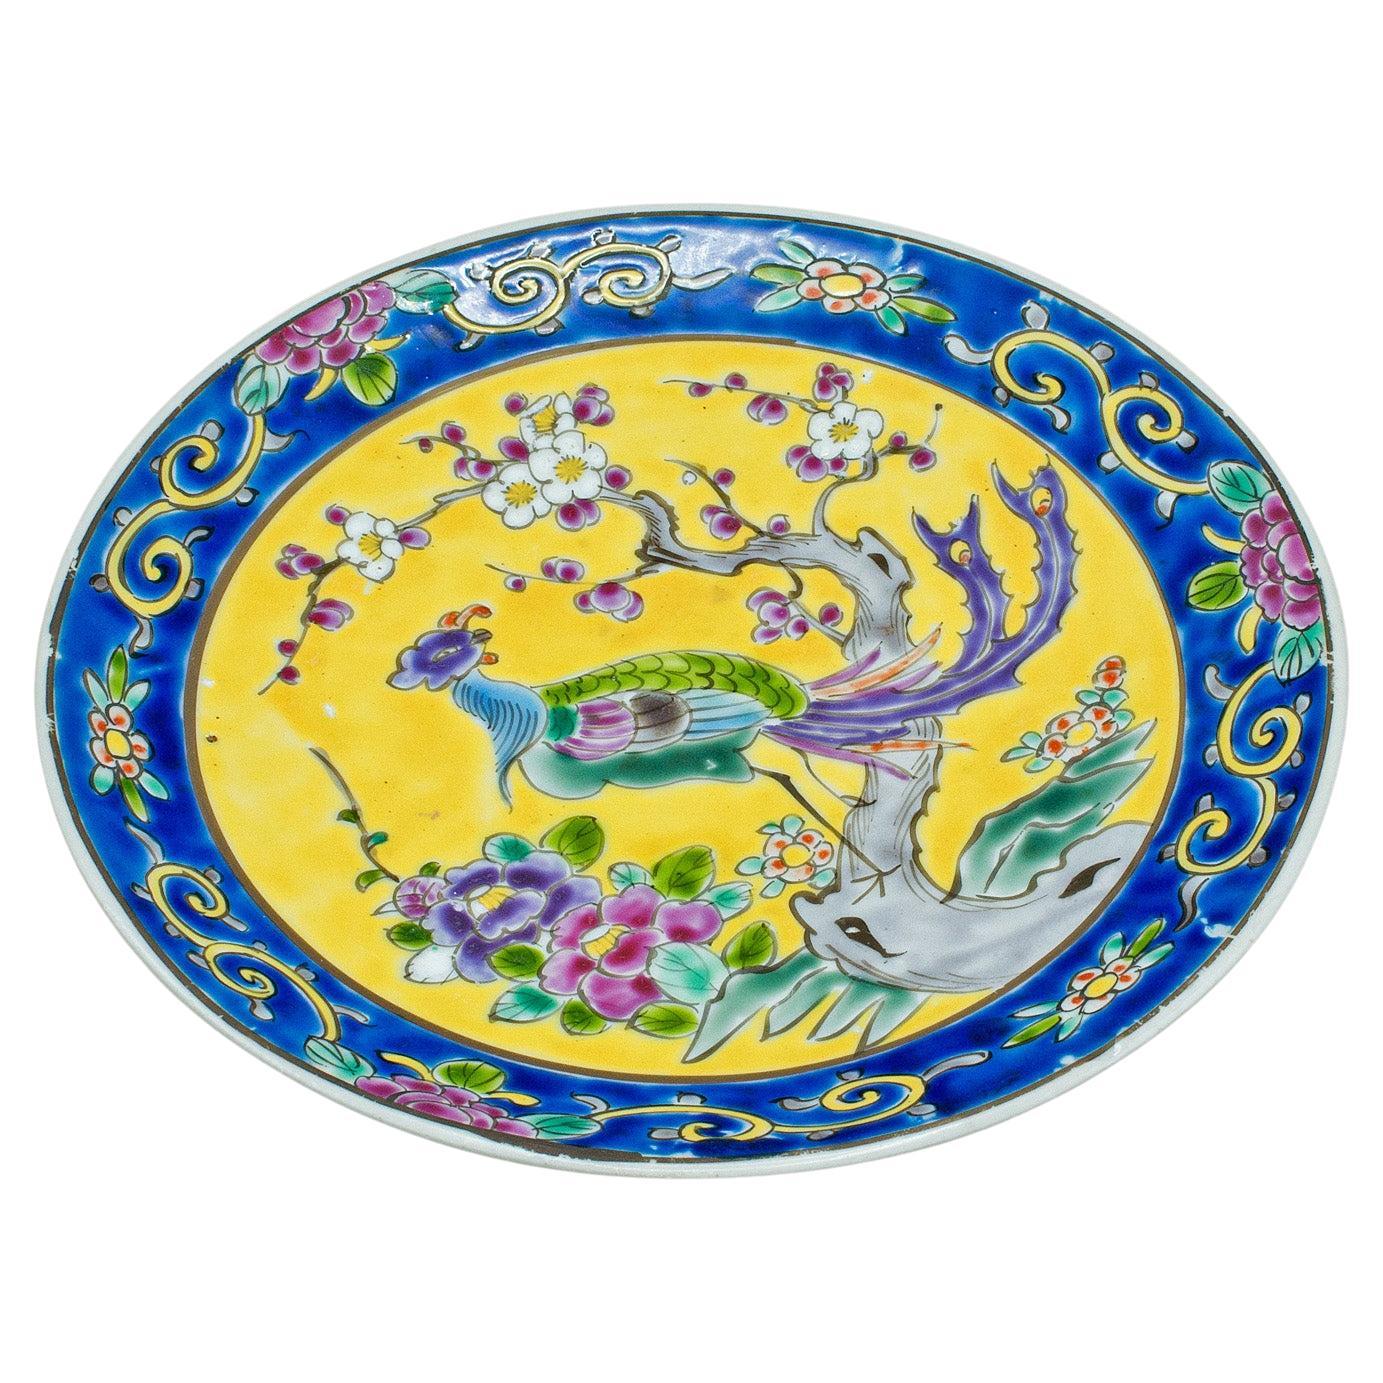 Antique Decorative Plate, Chinese, Display Plate, Famille Jaune, Victorian, Qing